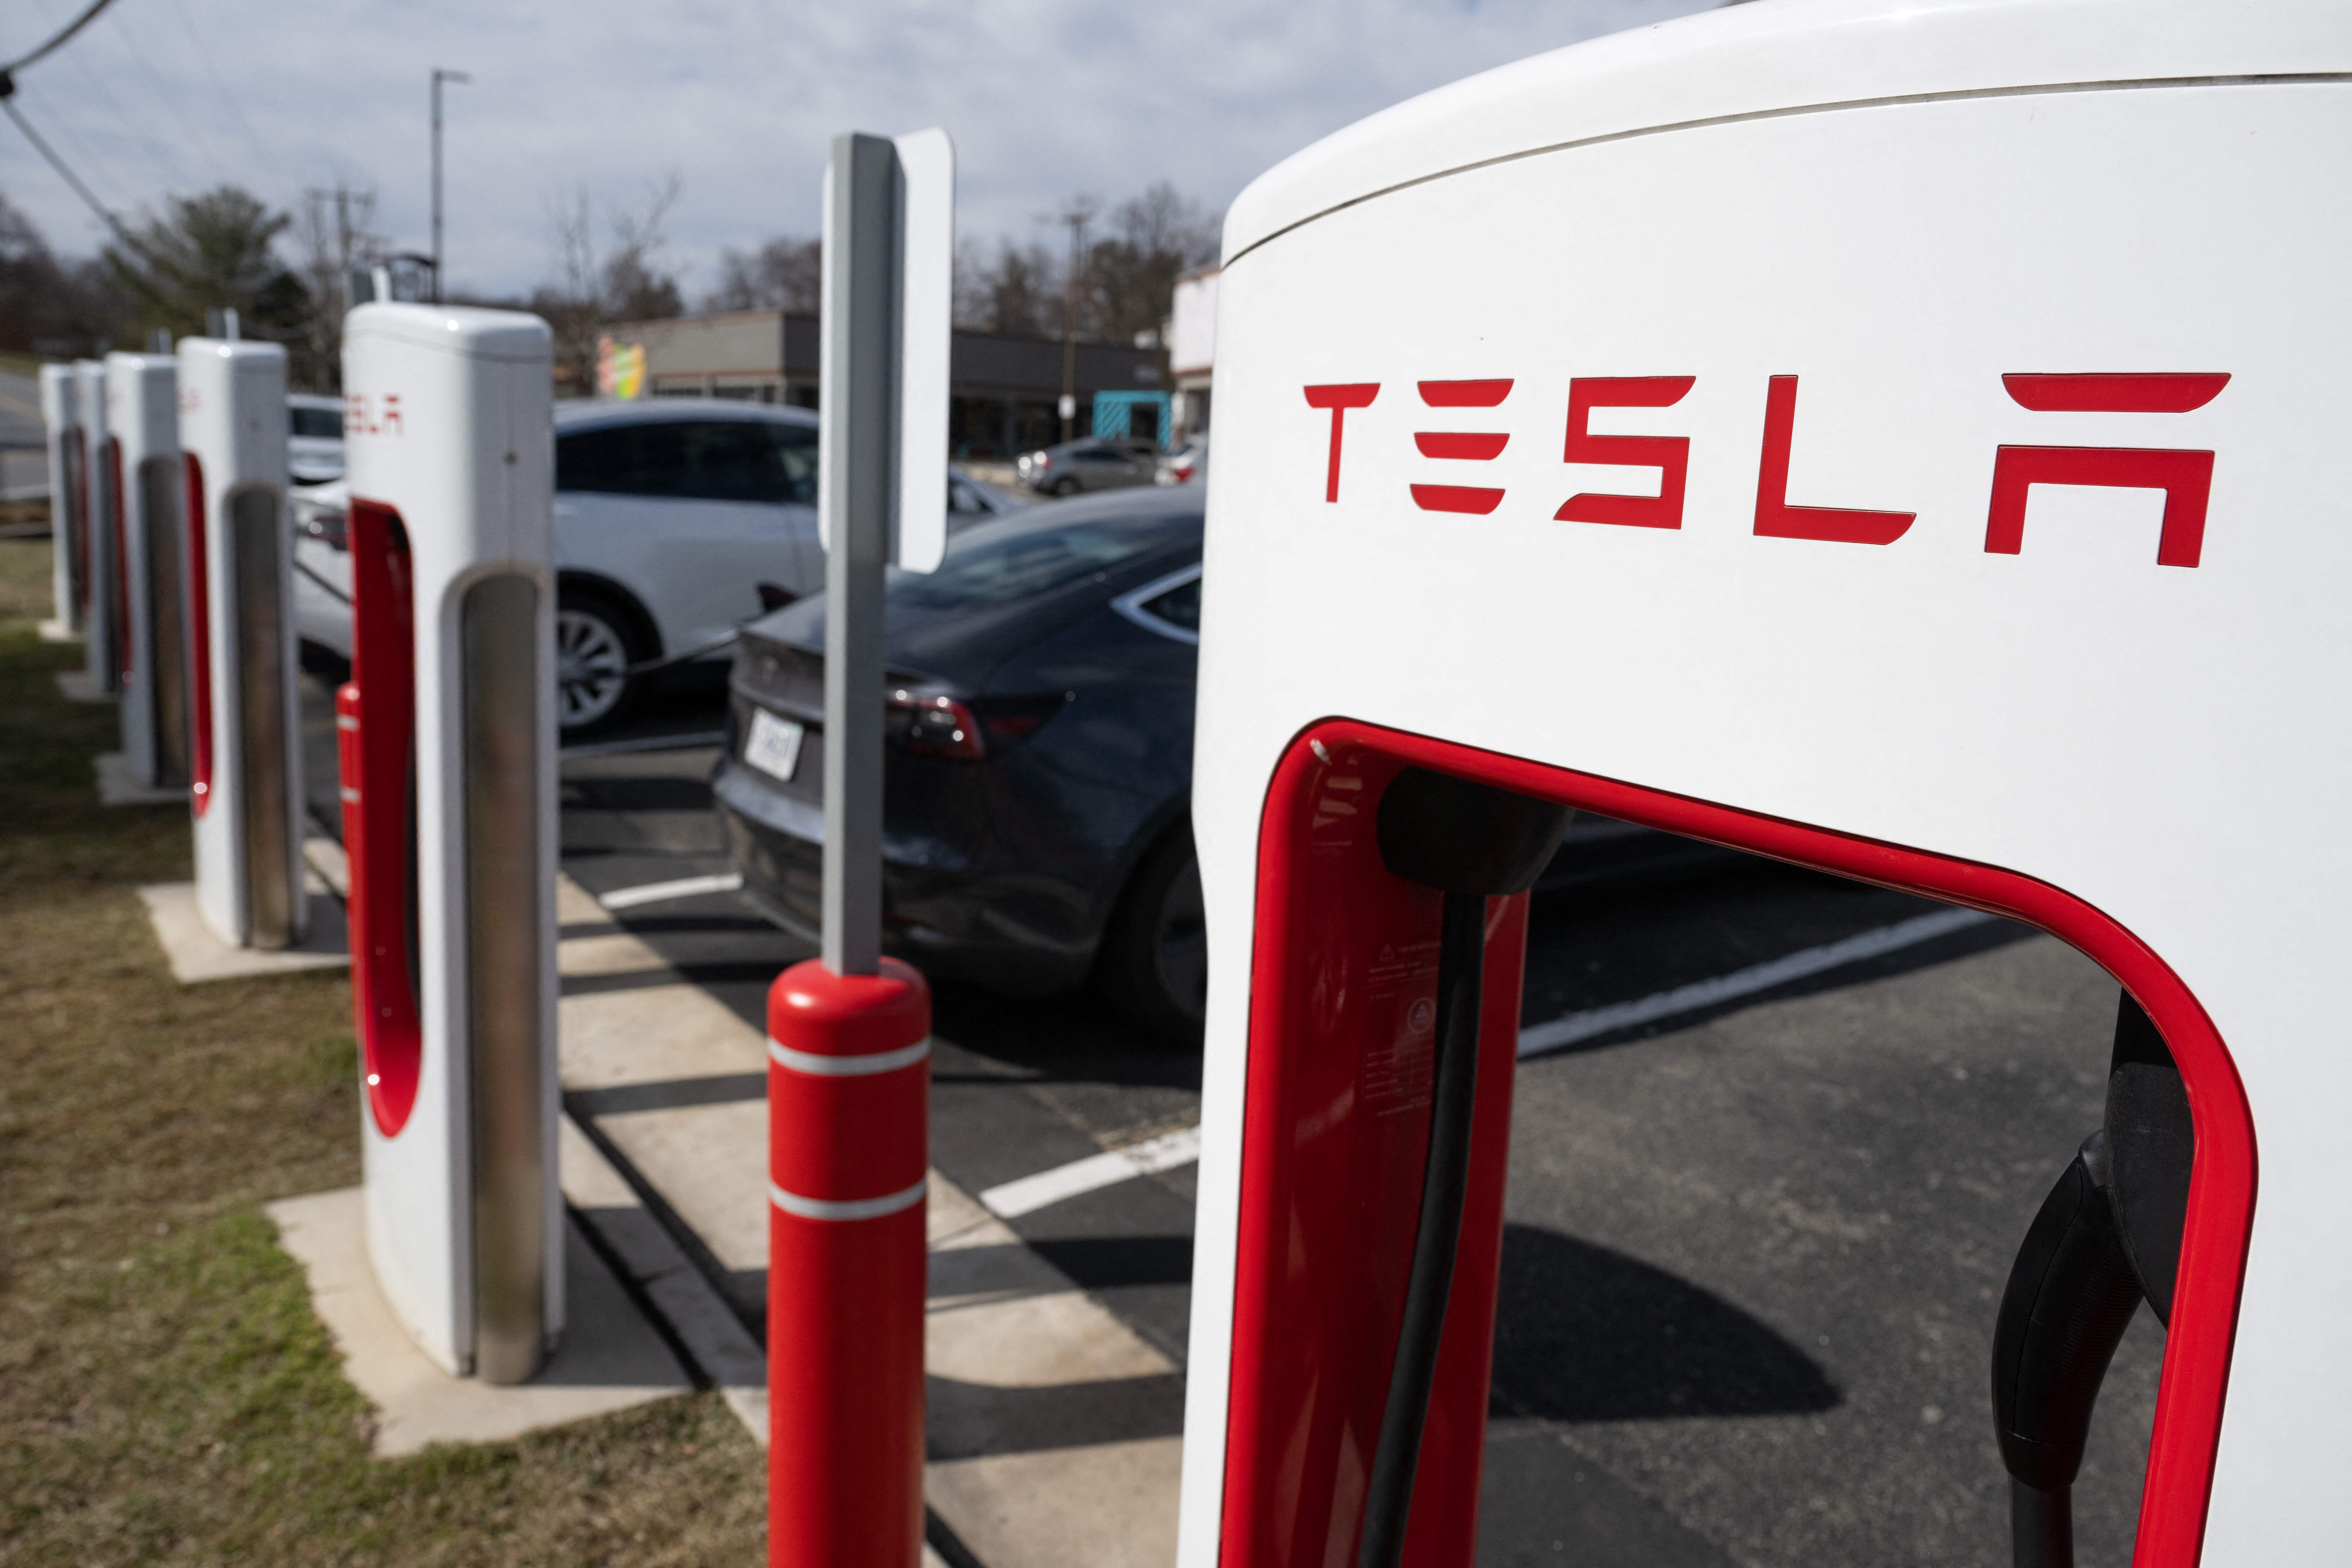 Teslas charge on superchargers